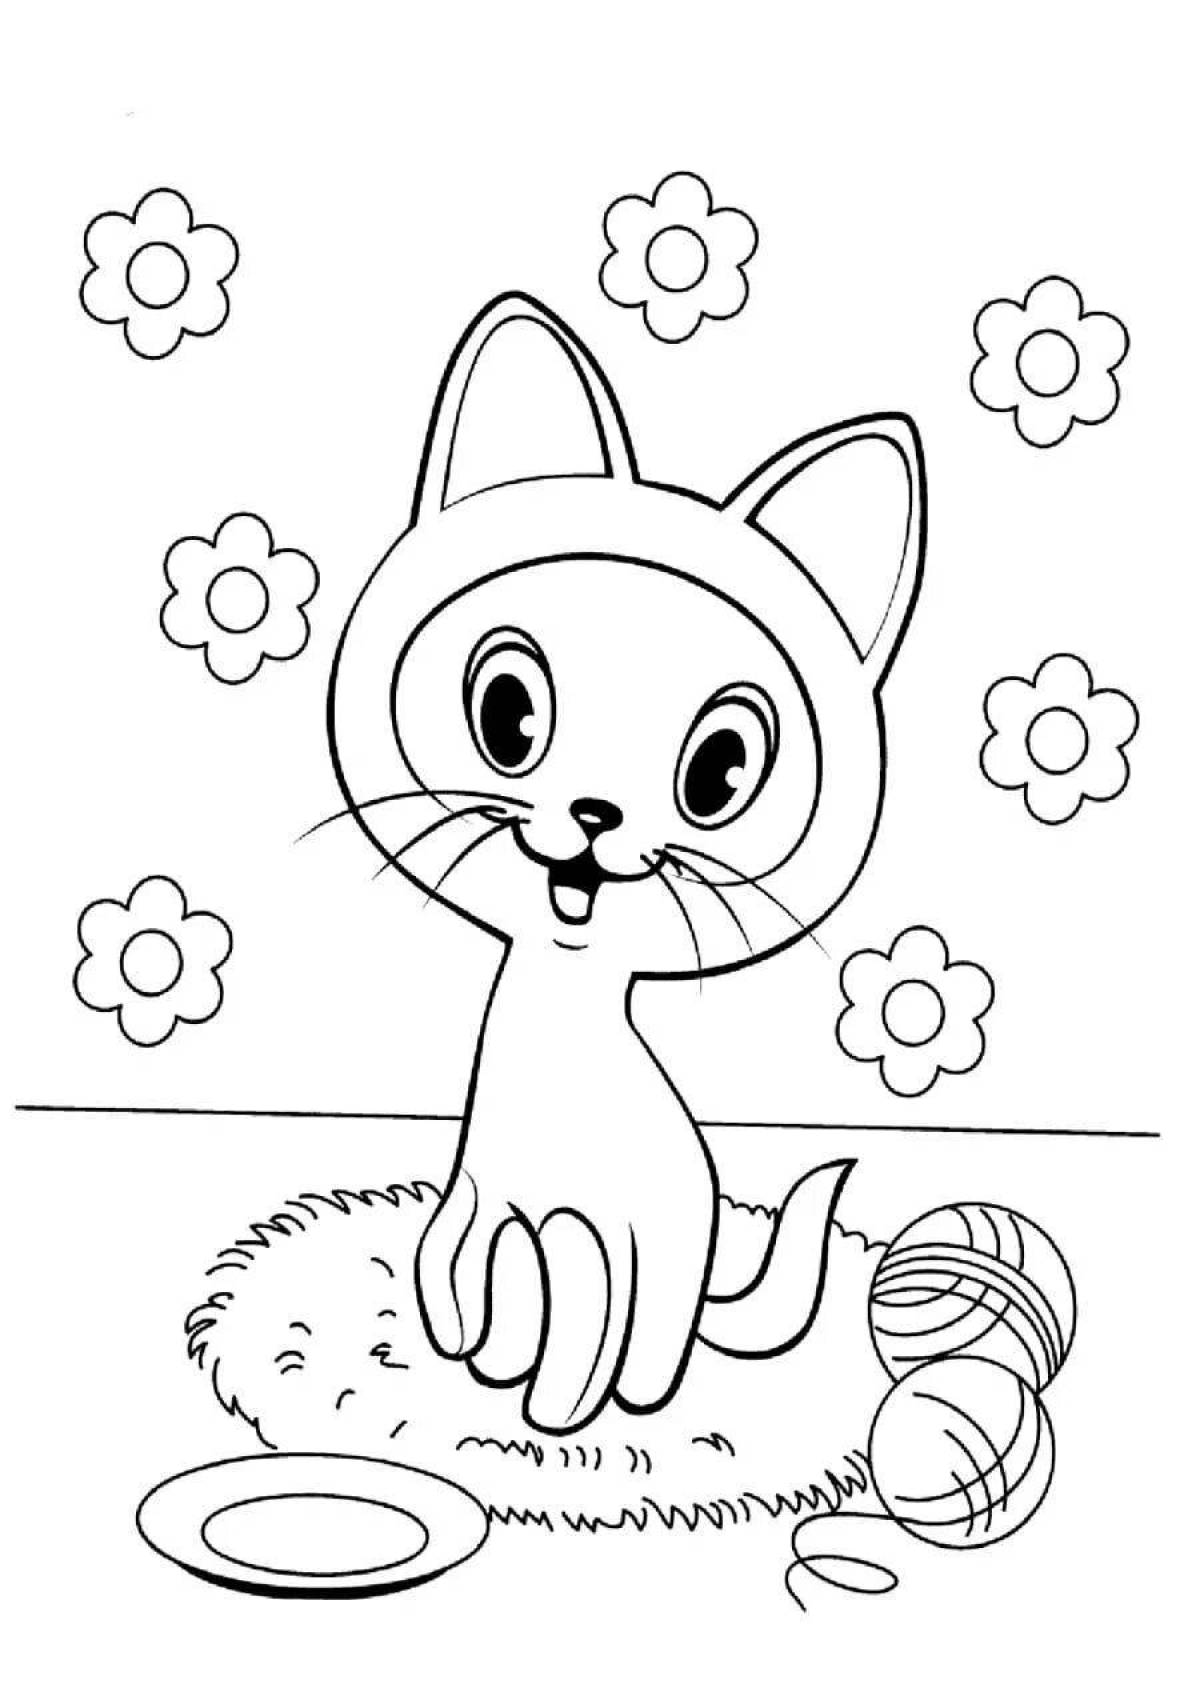 Crazy cat coloring book for kids 5-6 years old